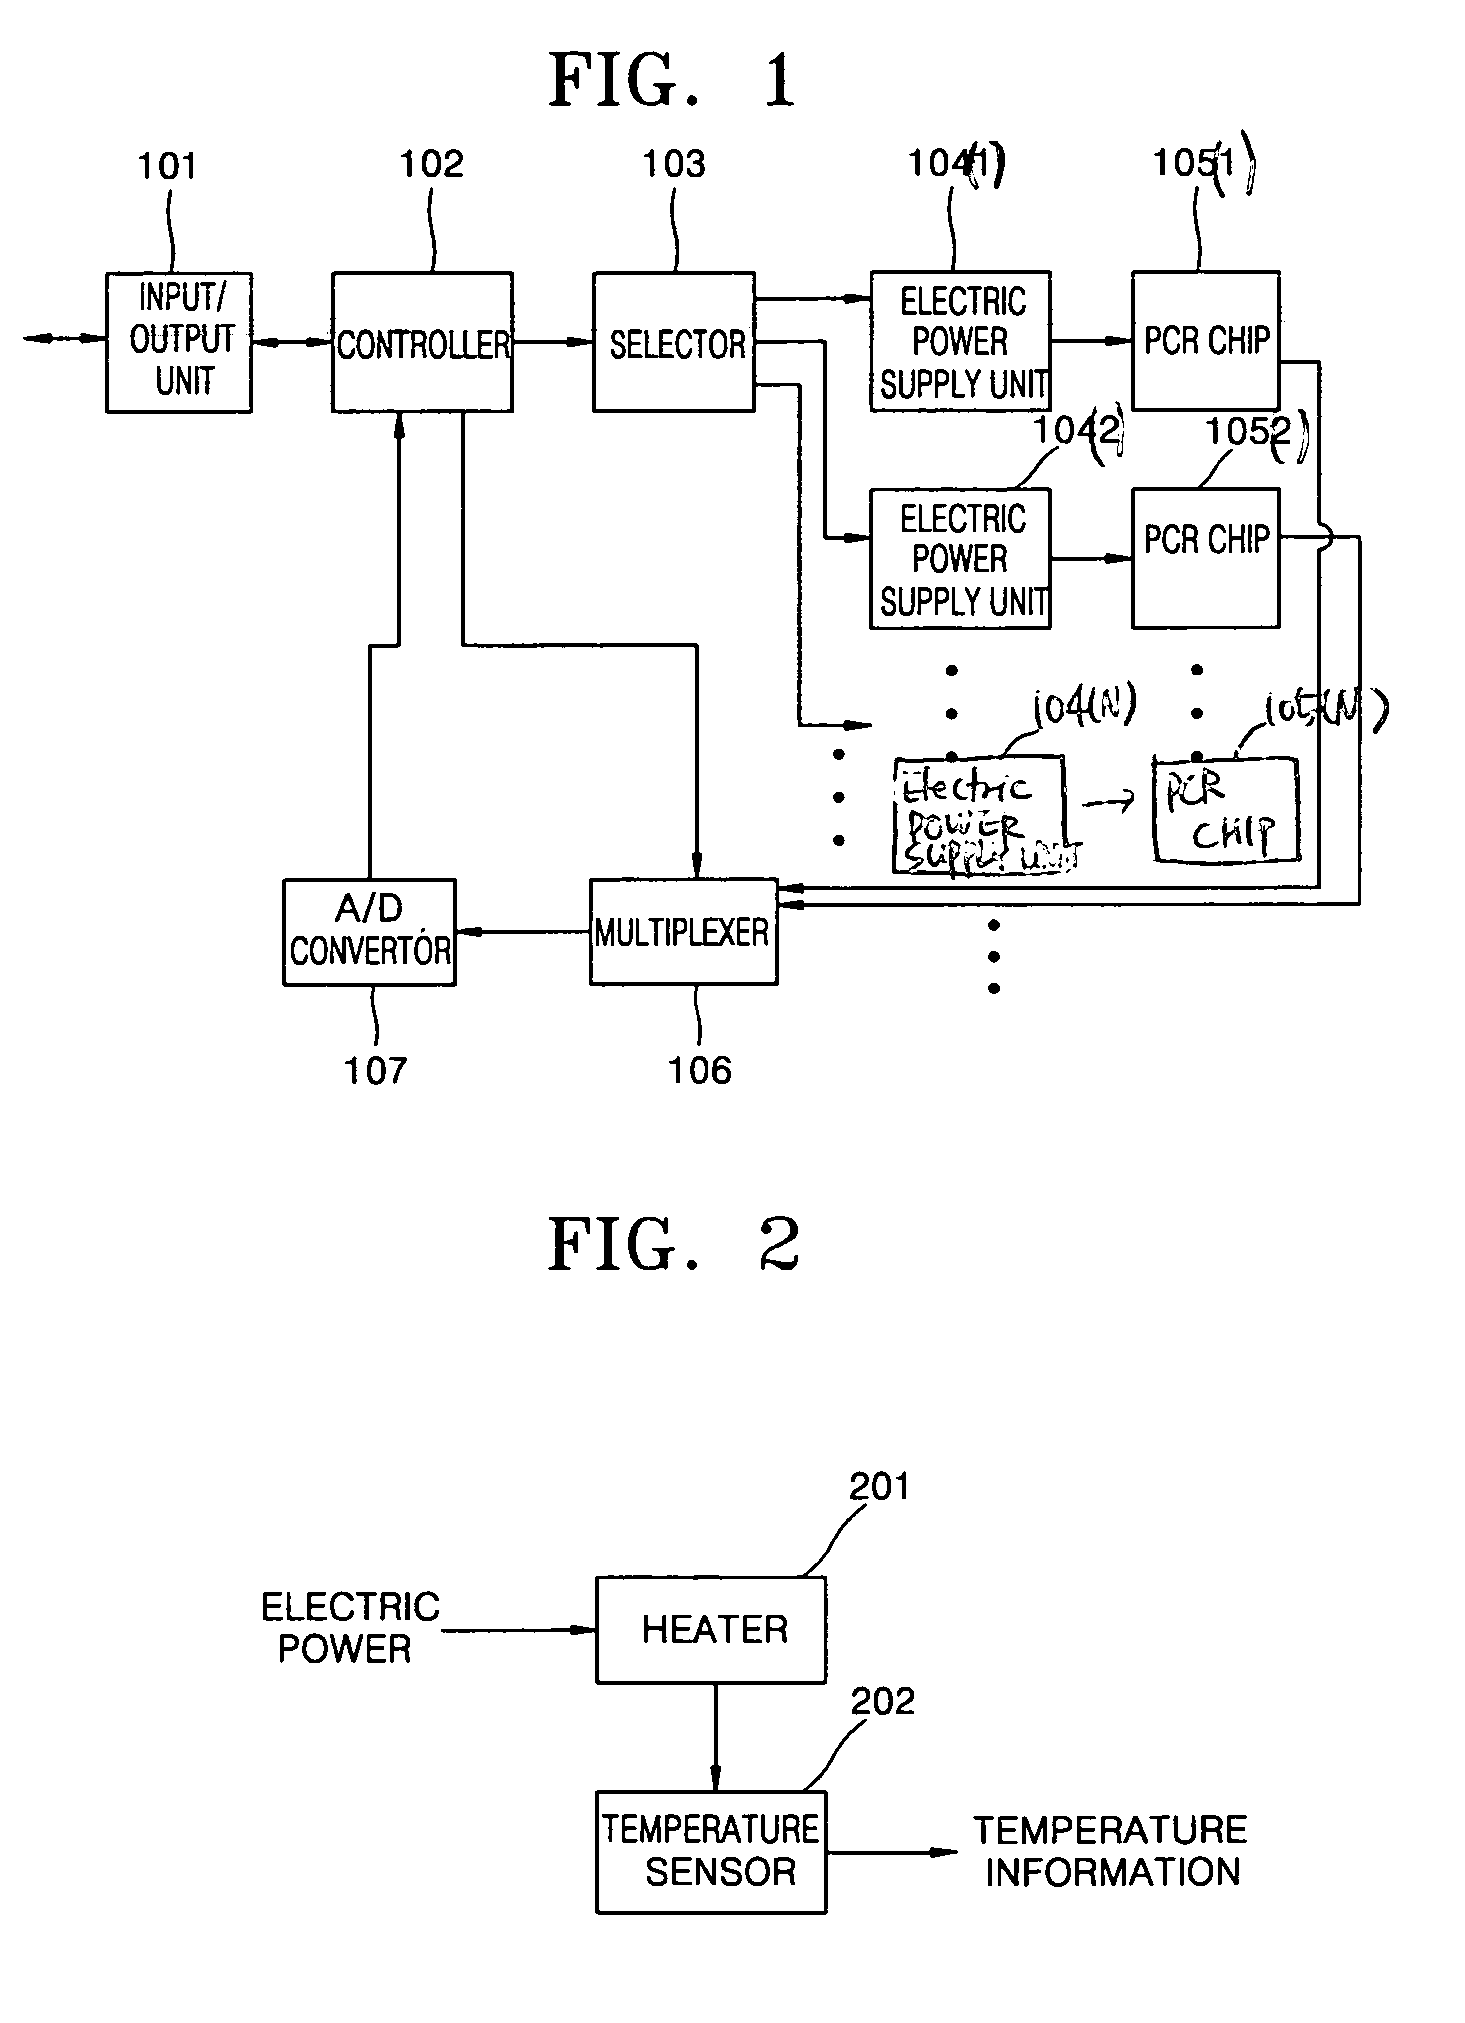 Temperature control method and apparatus for driving polymerase chain reaction (PCR) chip